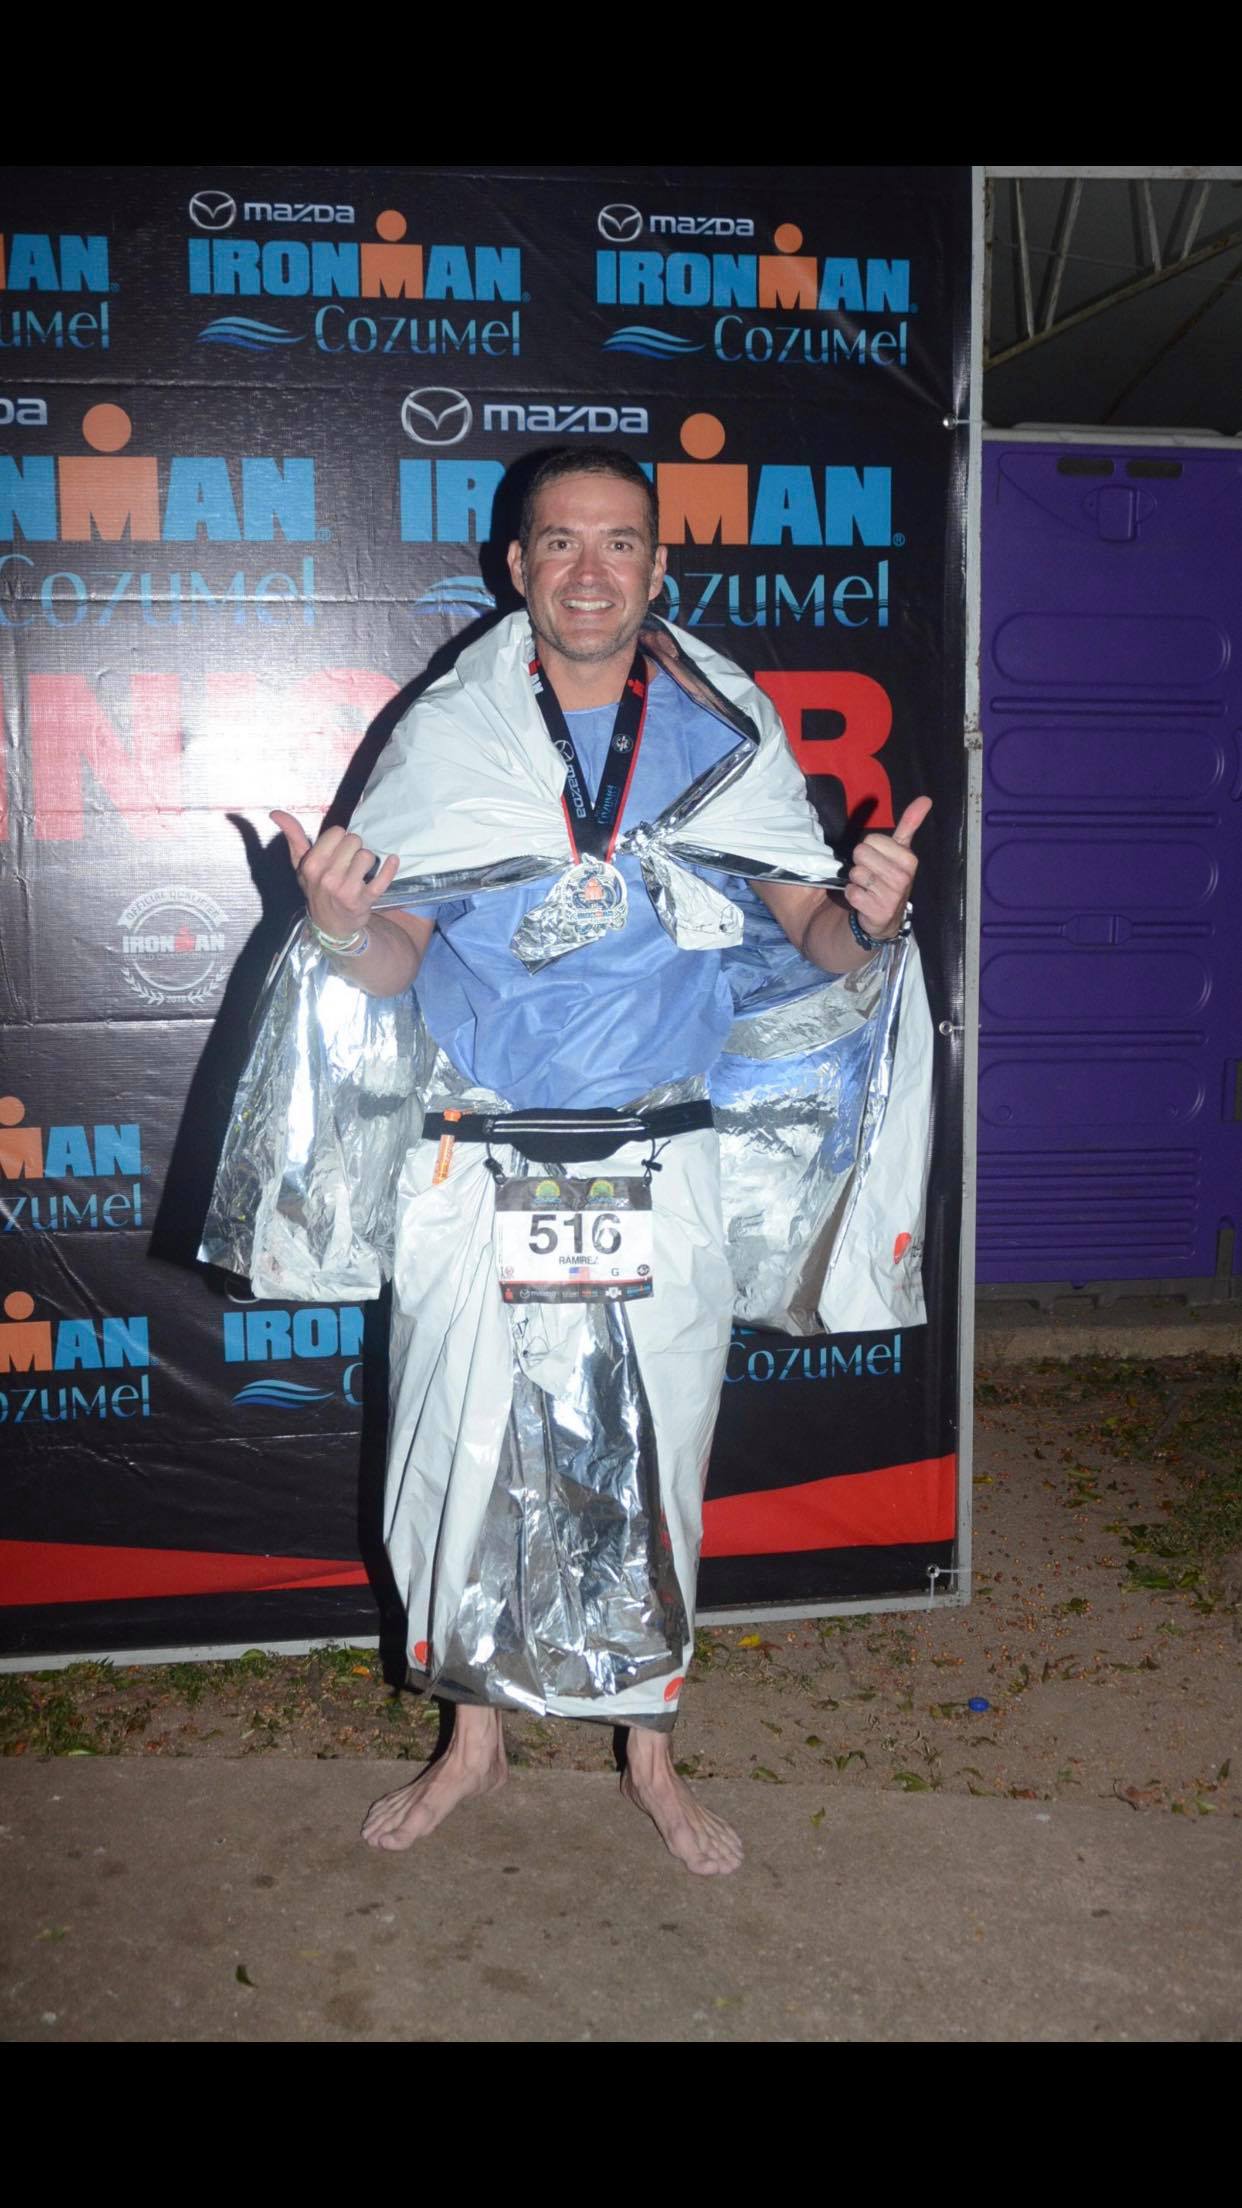 Coach_Terry_Wilson_Pursuit_of_The_Perfect_Race_IRONMAN_Finish_1.jpg